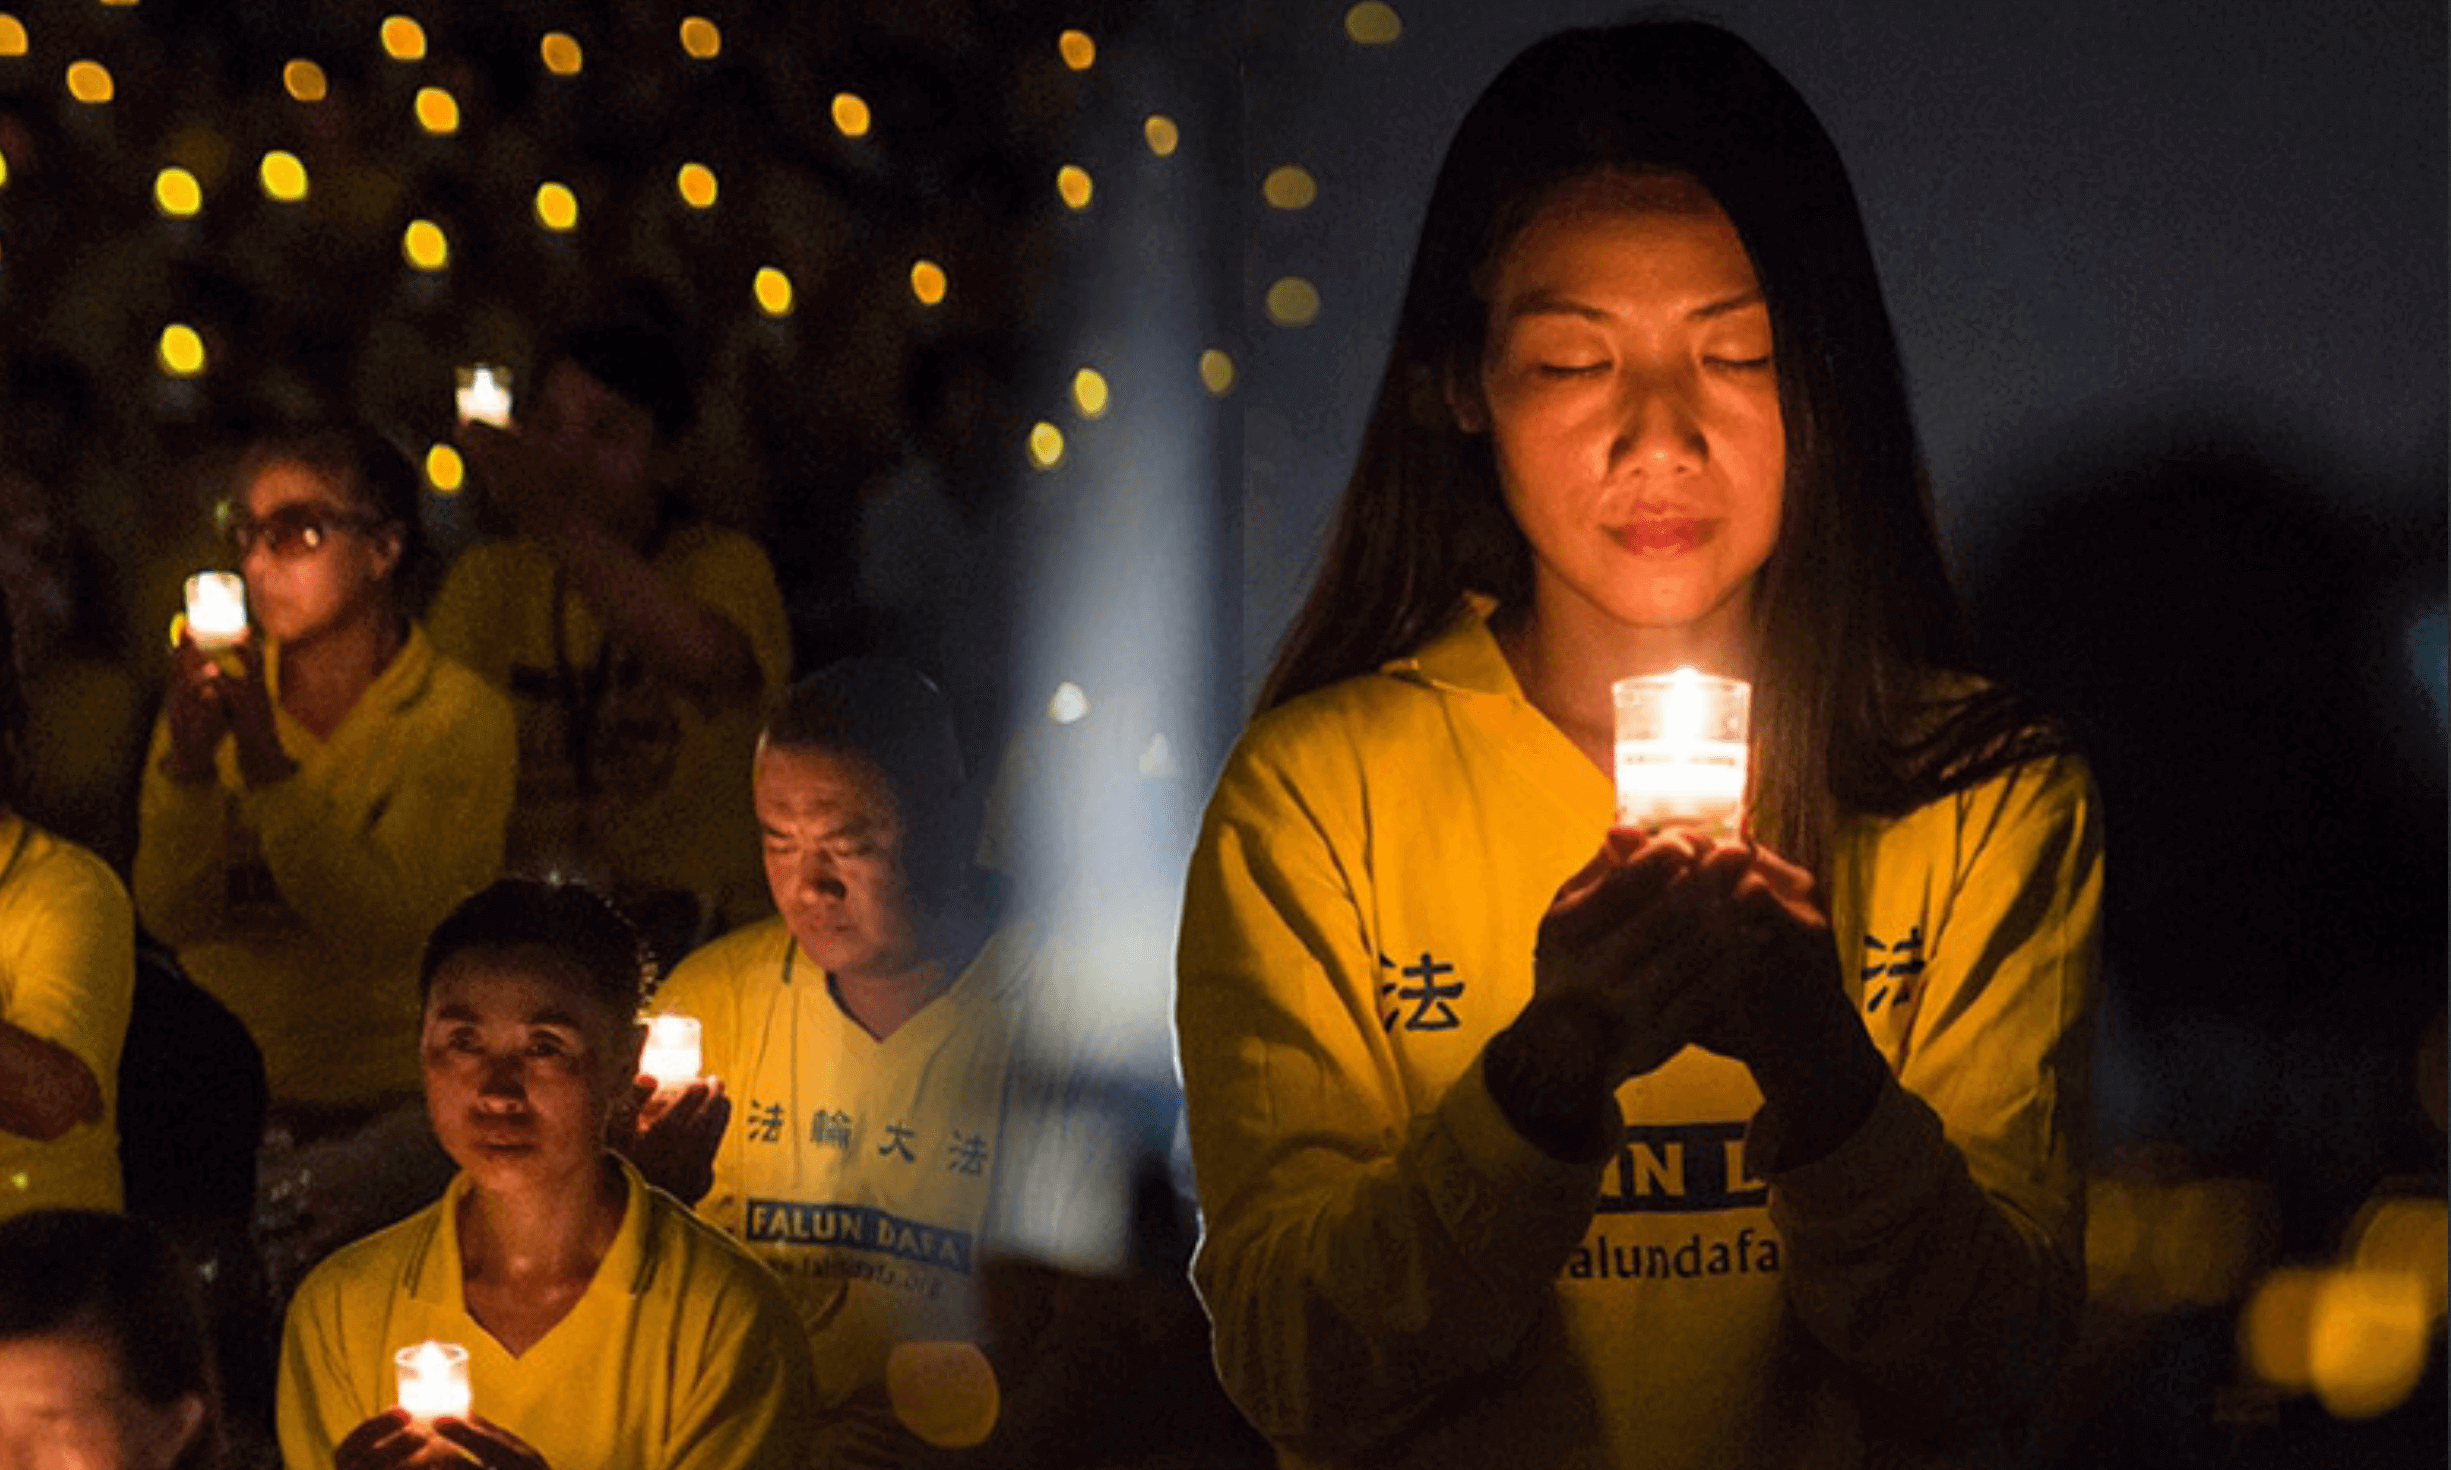 Falun Gong practitioners at the annual candlelight vigil in Washington, D.C. on the anniversary of the persecution, honoring fellow believers in China who have died during the persecution.